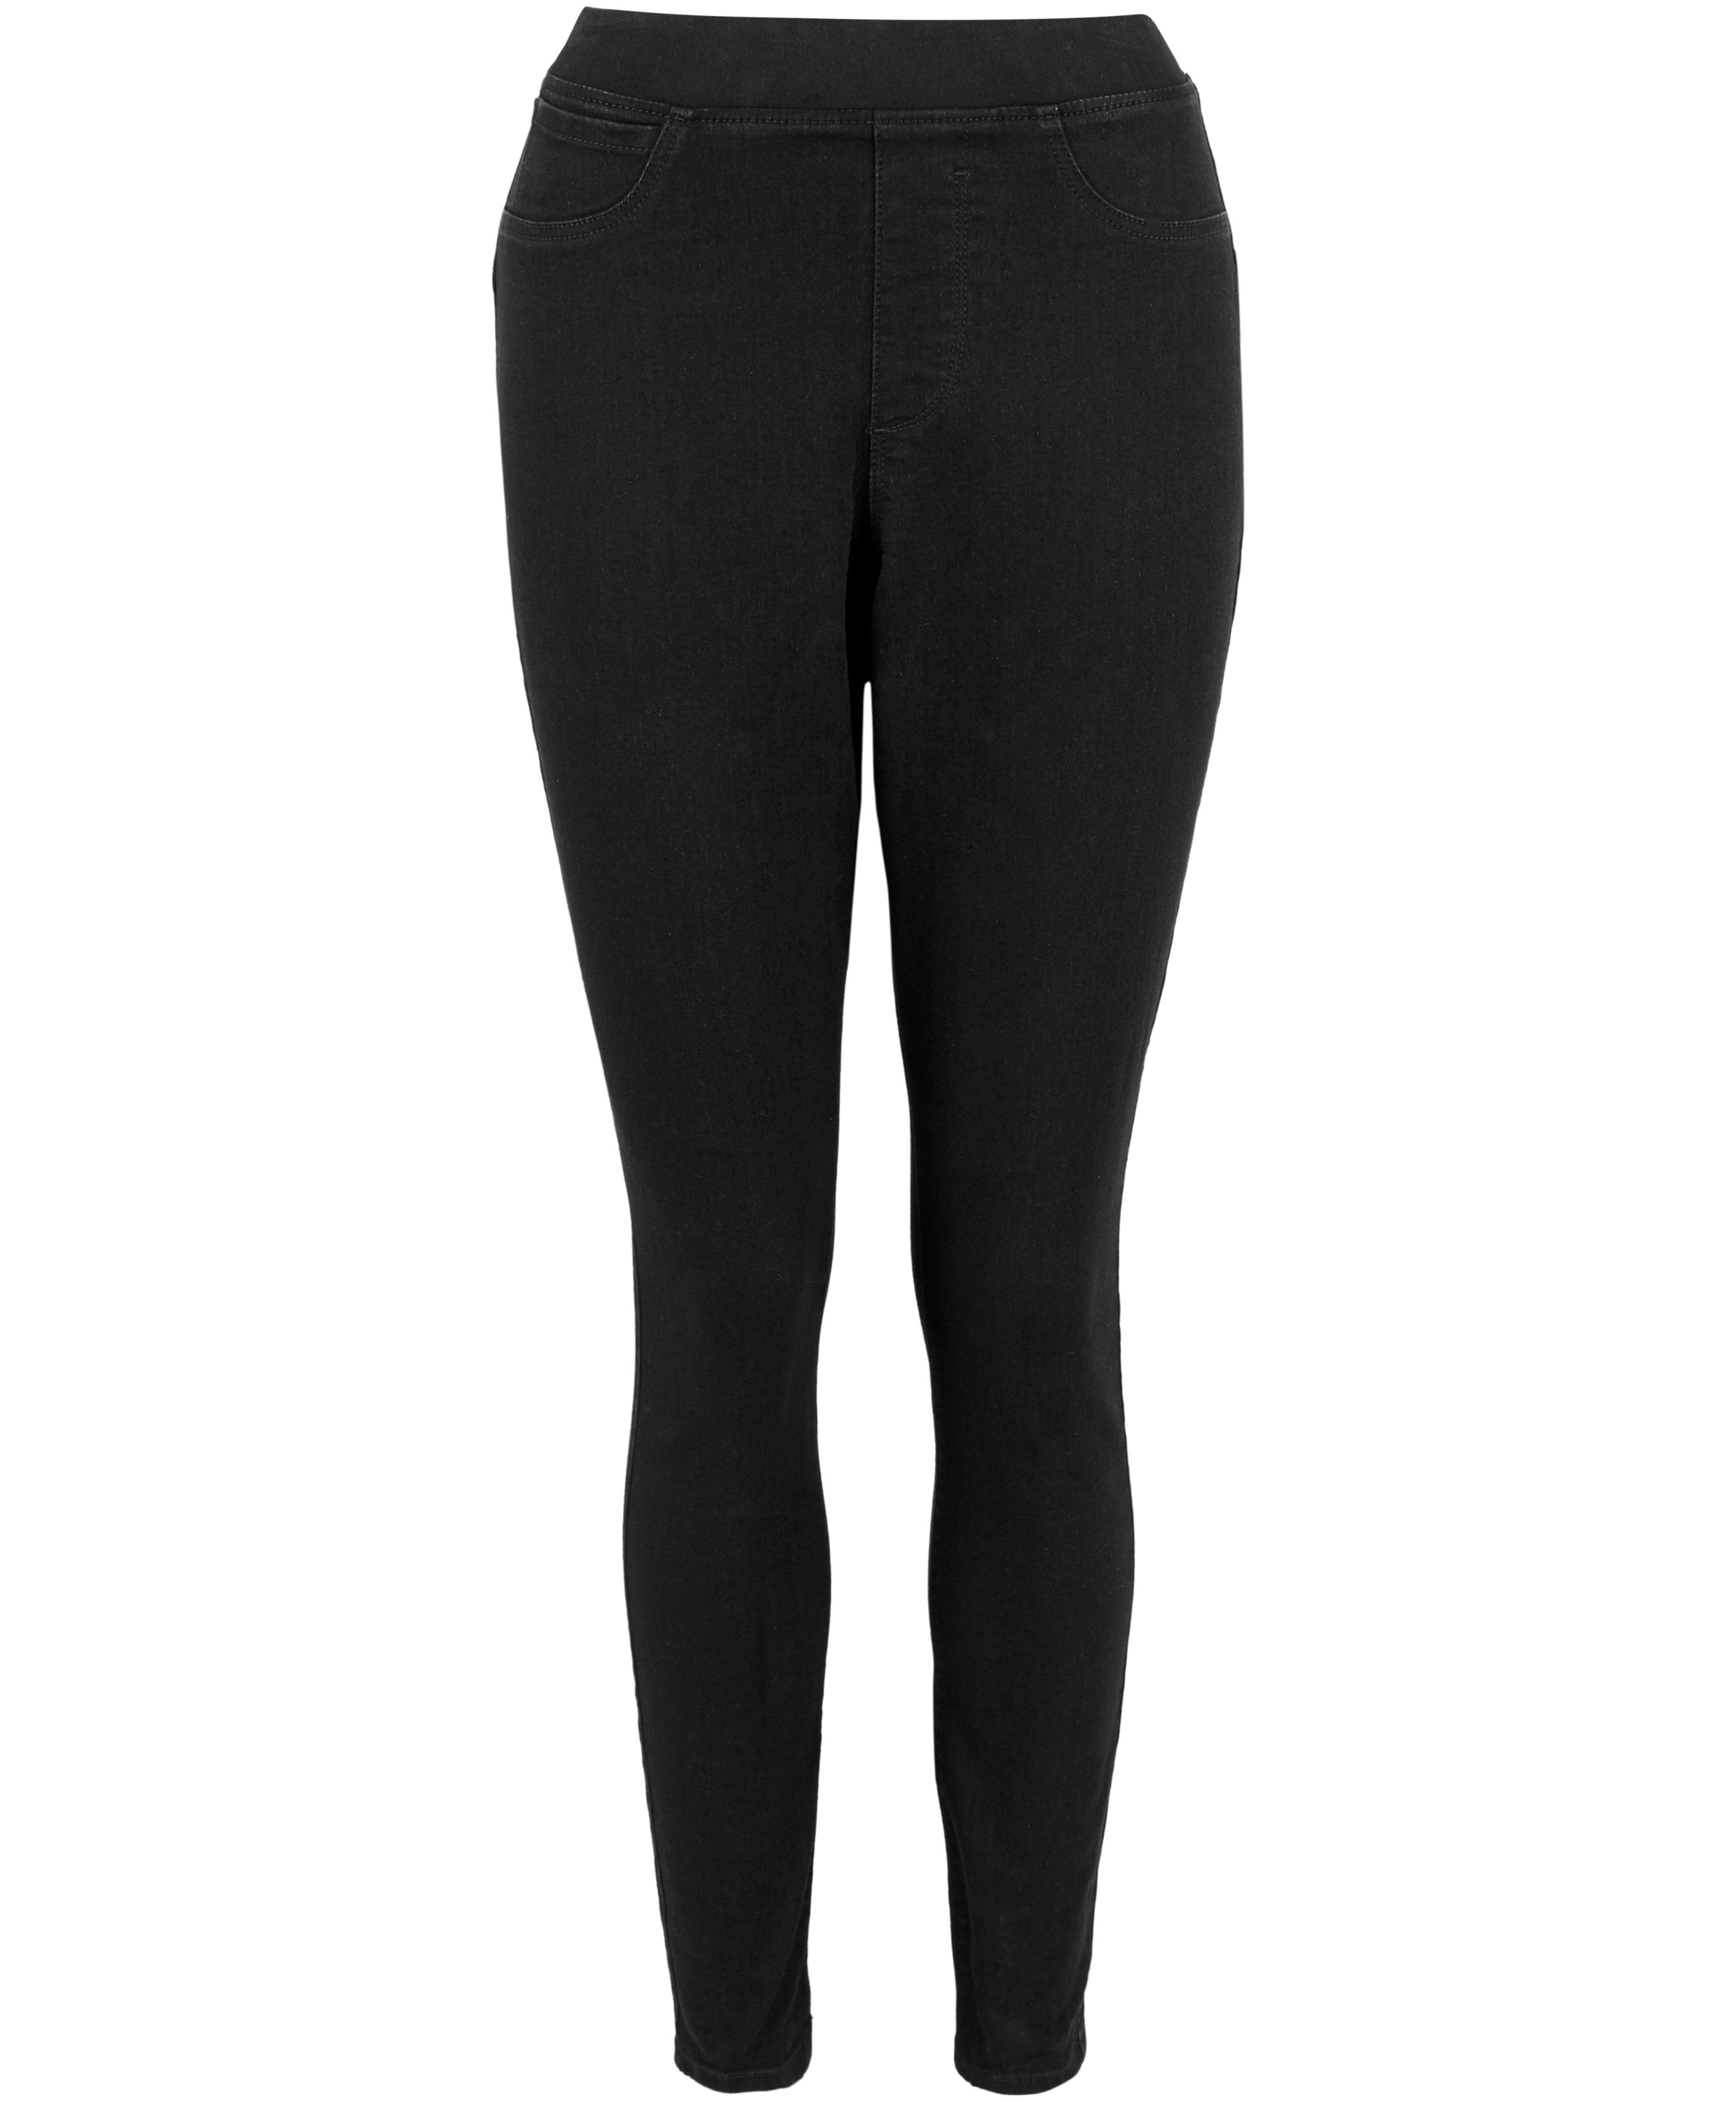 Buy ROOLIUMS Women Jeggings, High Rise Tummy Tuck Jeggings (Black, Small)  at